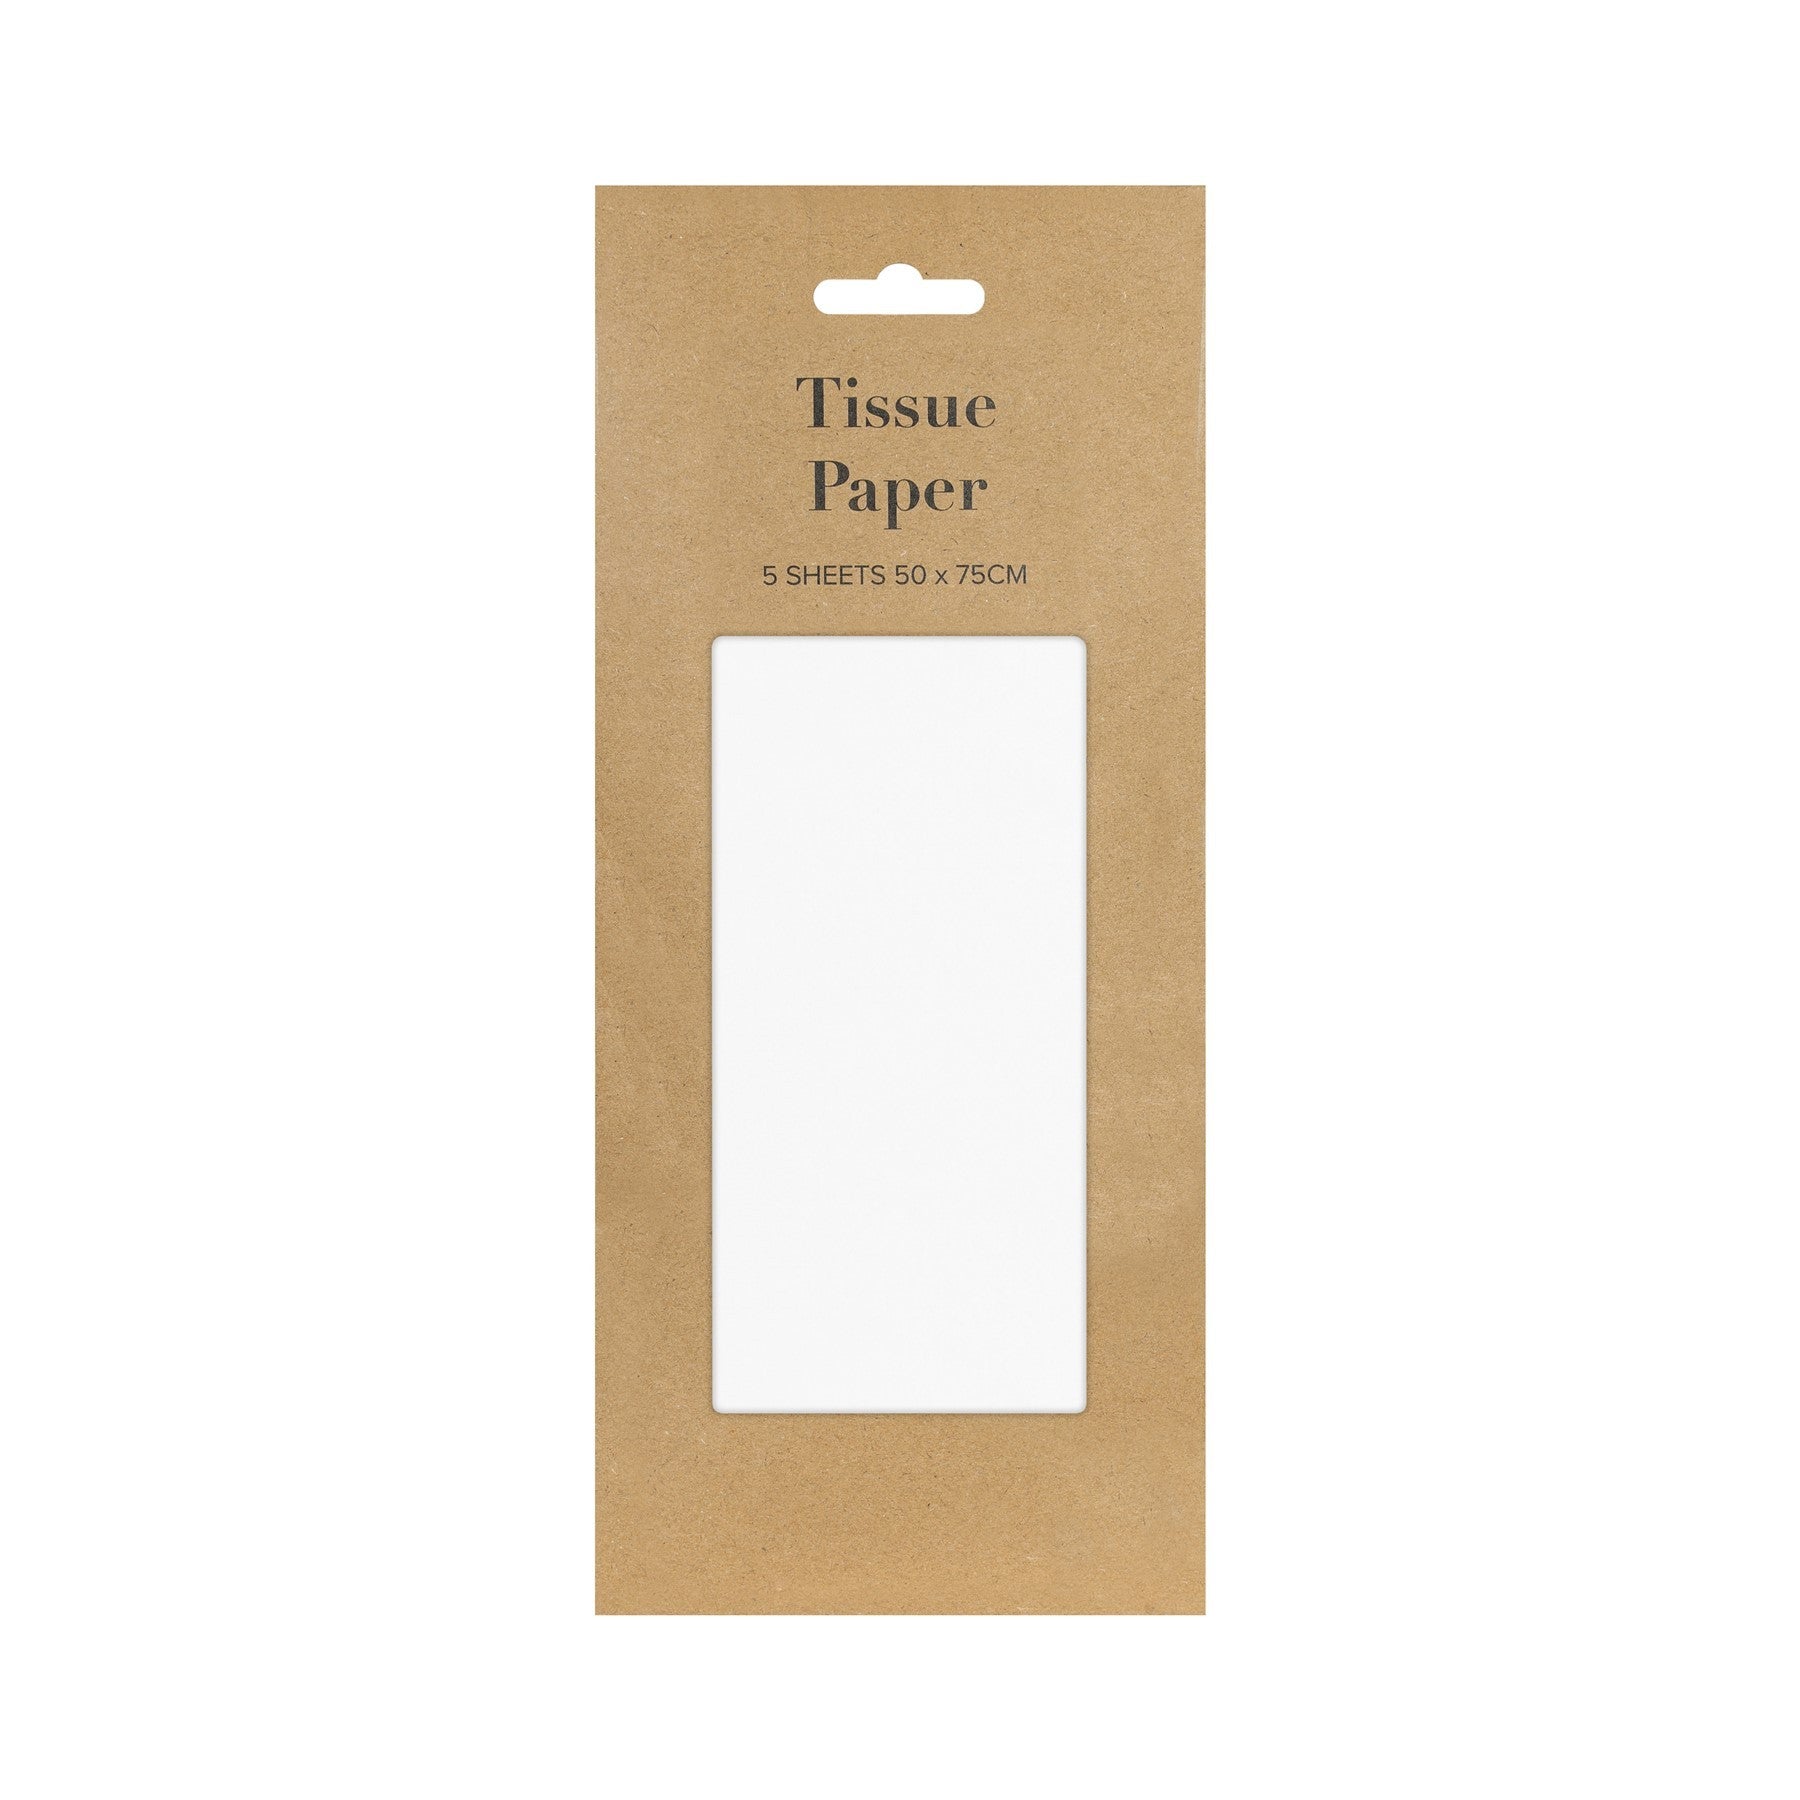 View White Tissue Paper Pack 5 sheets information